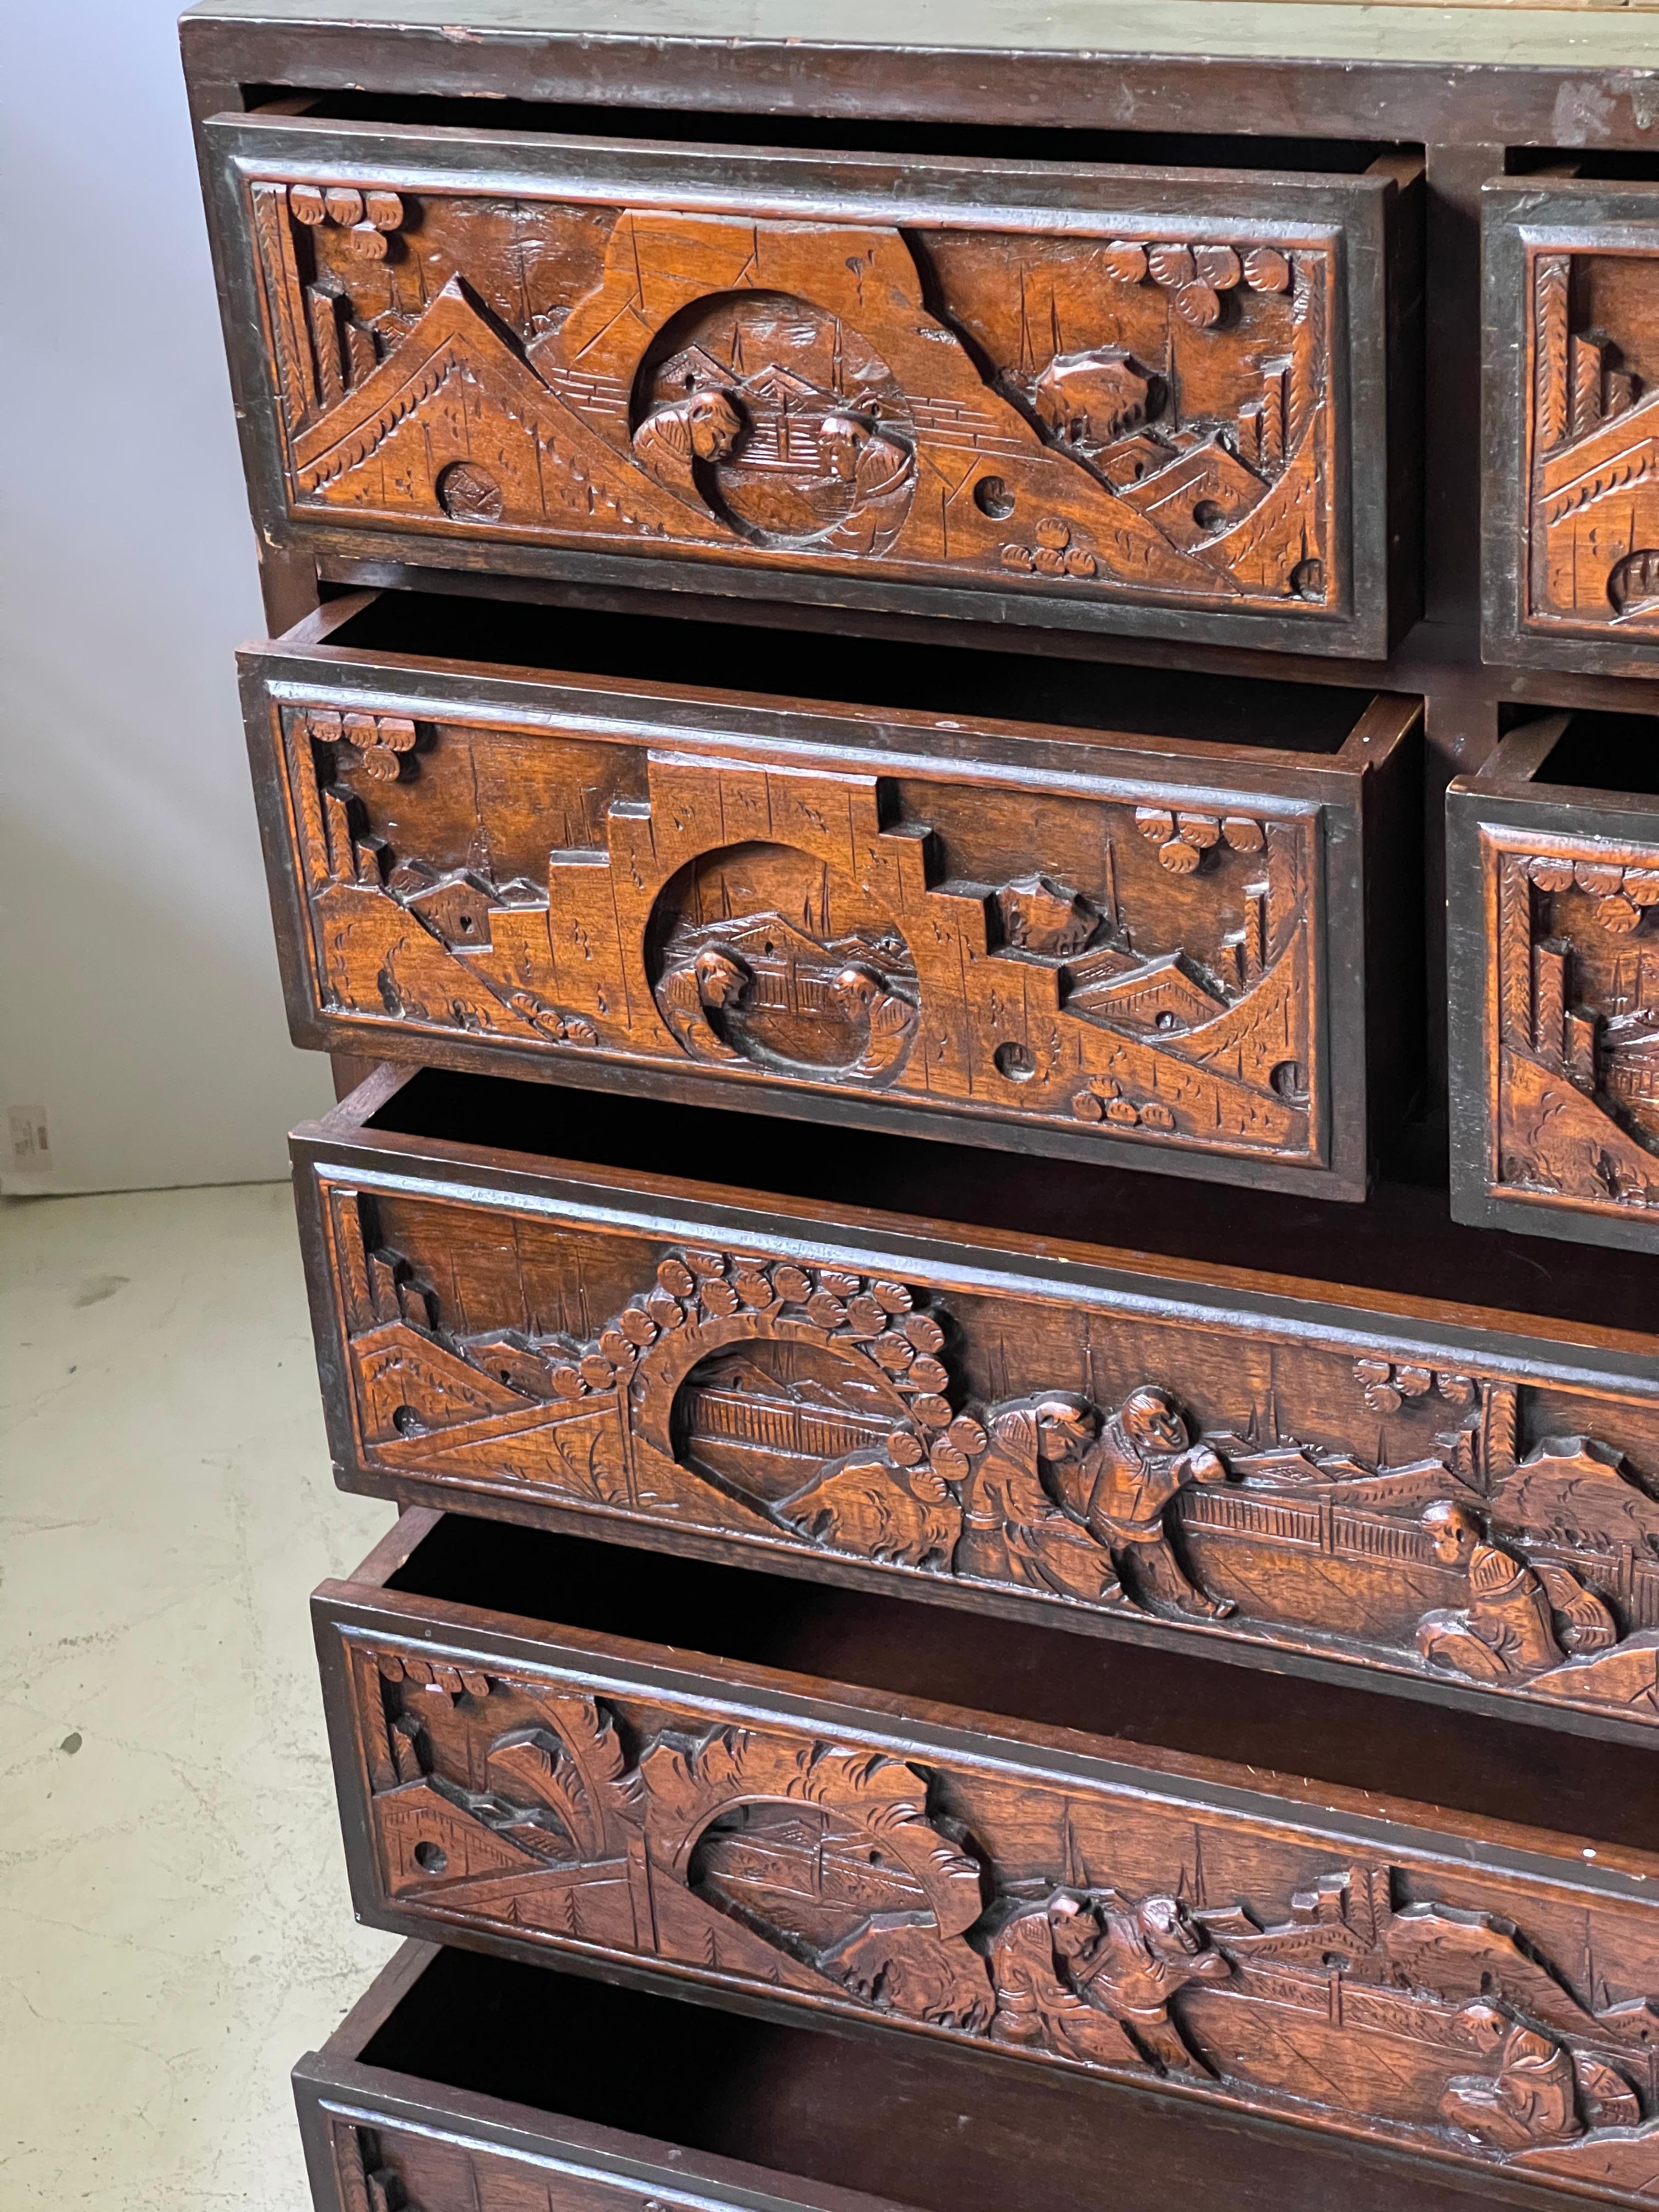 Early 20th century Chinese camphor wood figural carved batchelor's chest. This solid wood seven drawer chest features remarkable relief carved illustrations of wisemen in palace and garden scenes. Inset chinoiserie panels decorate the top, front,